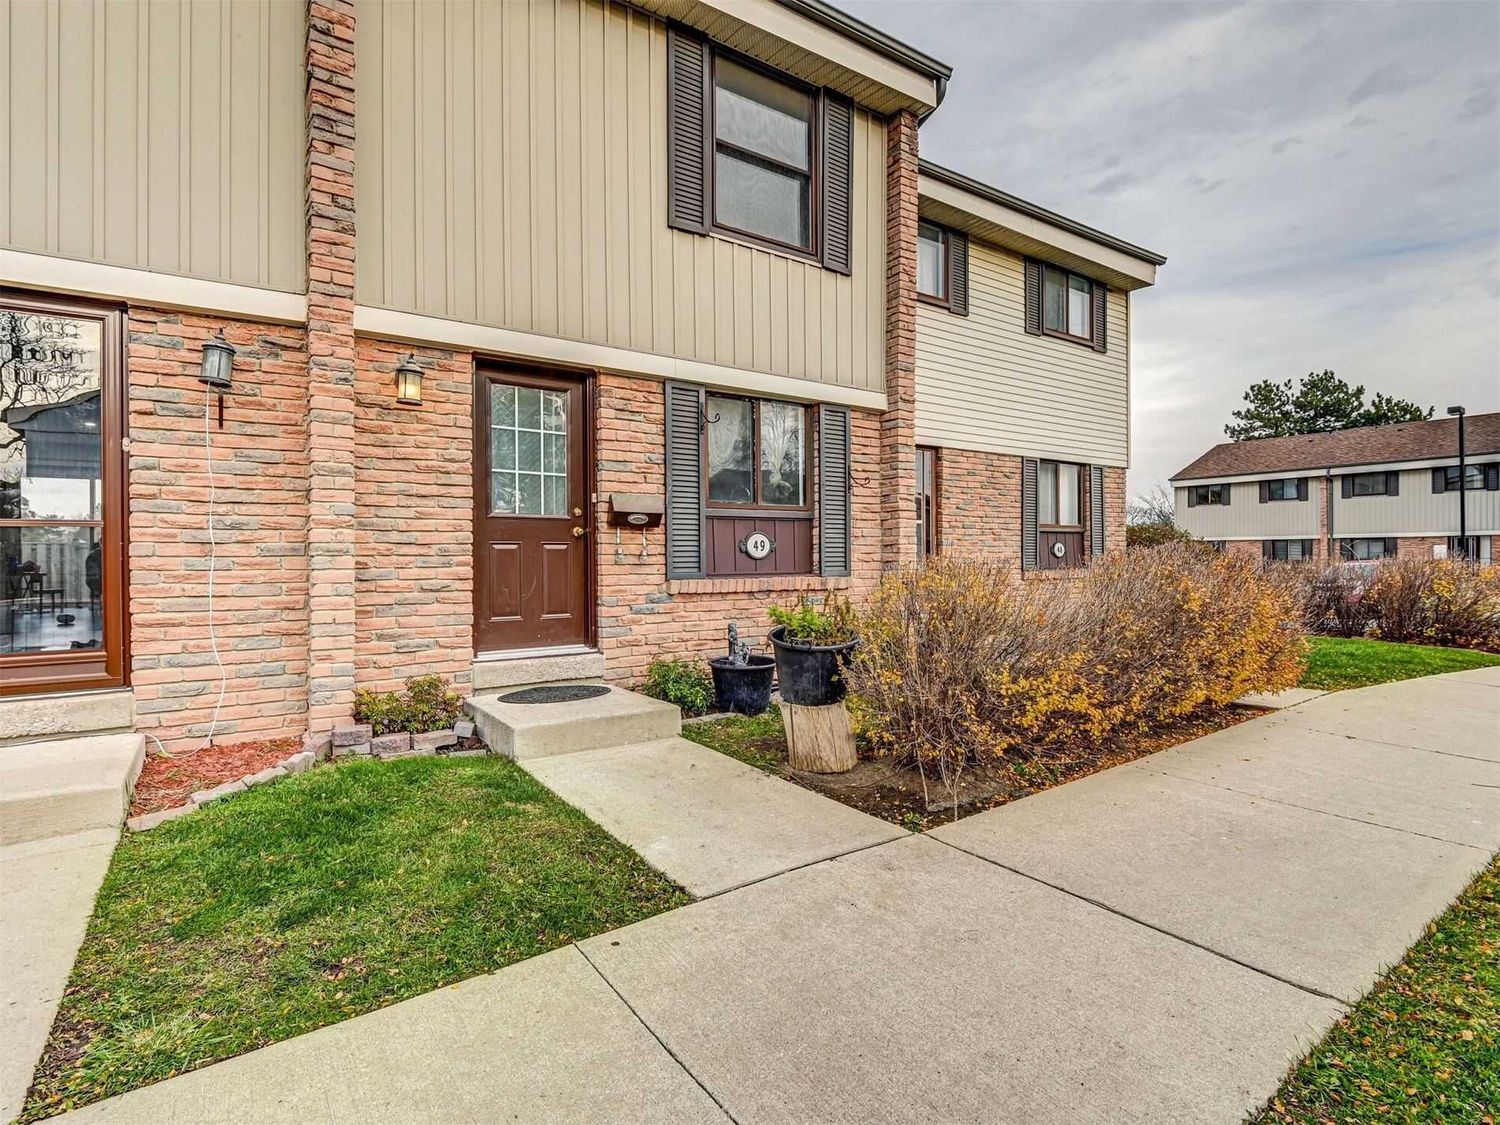 2779 Gananoque Drive. 2779 Gananoque Drive Townhomes is located in  Mississauga, Toronto - image #1 of 2